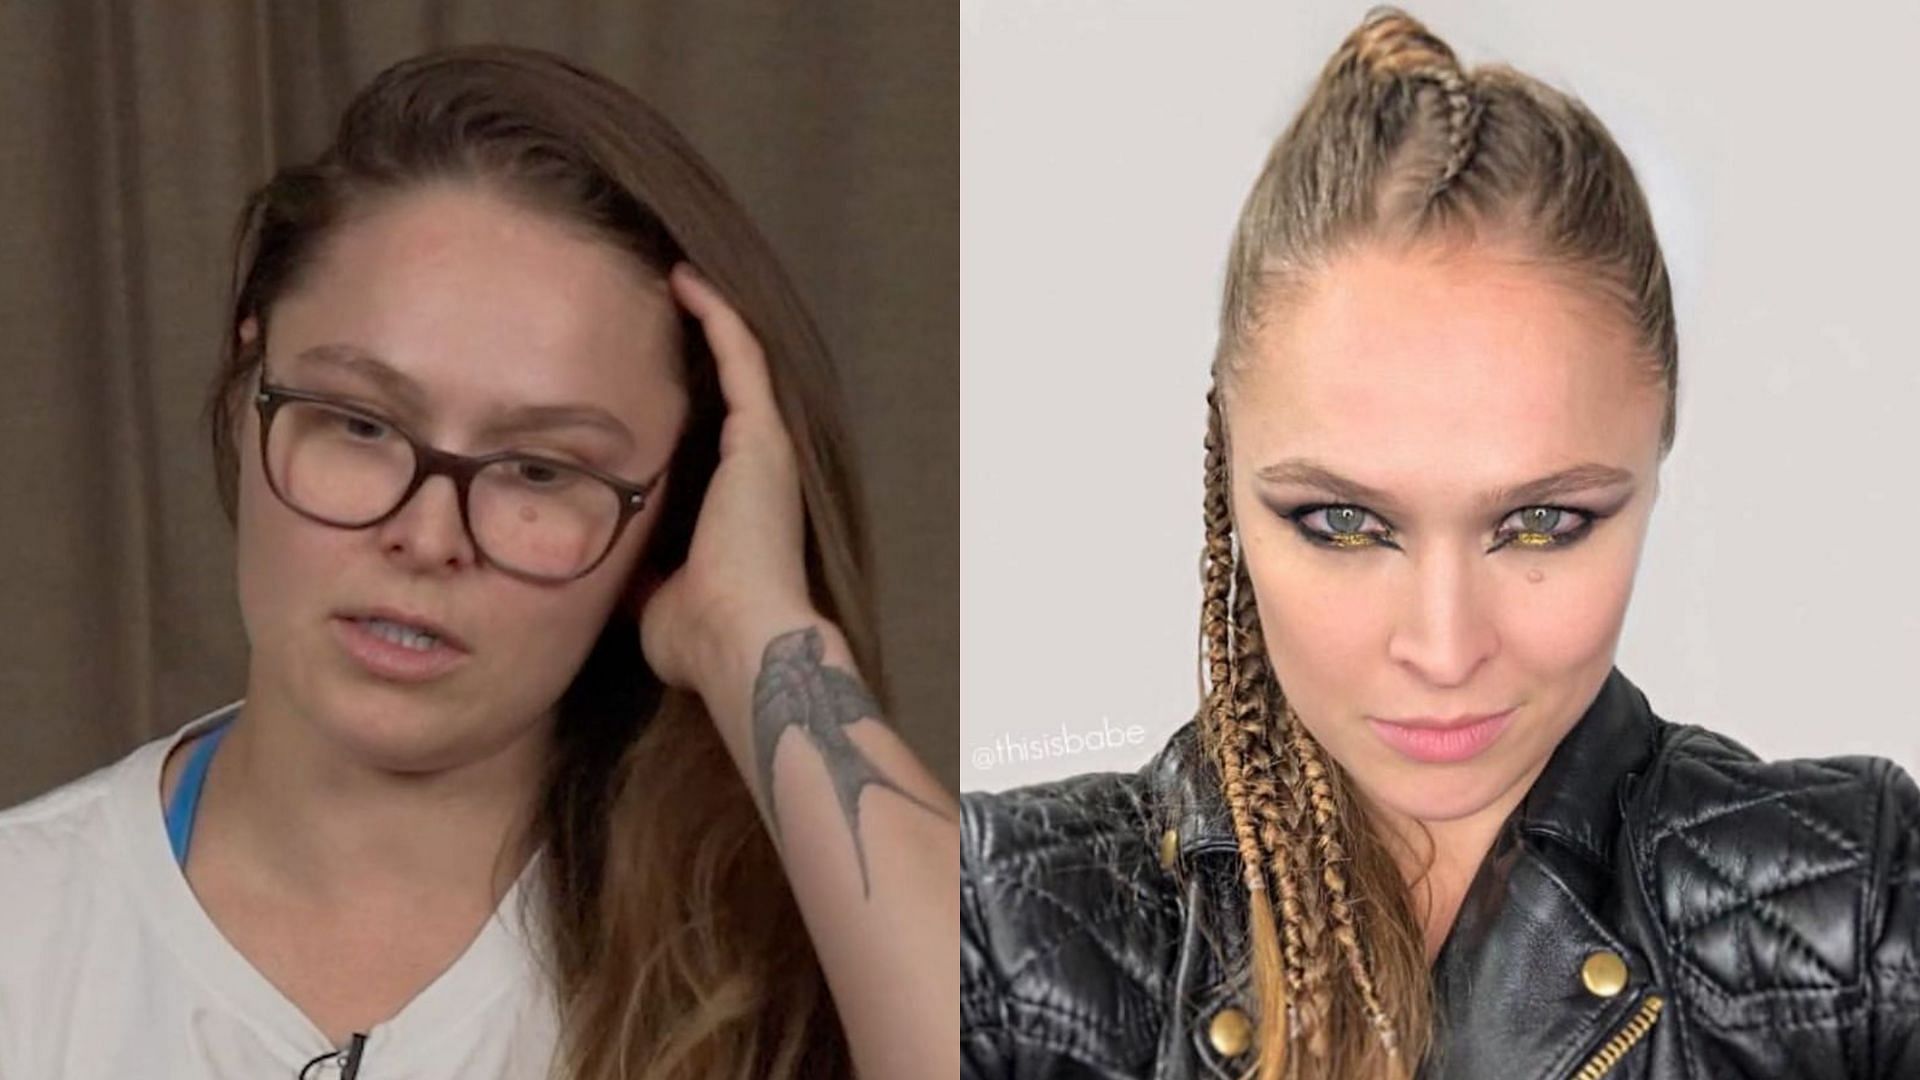 Ronda Rousey without makeup (left) and with makeup (right)